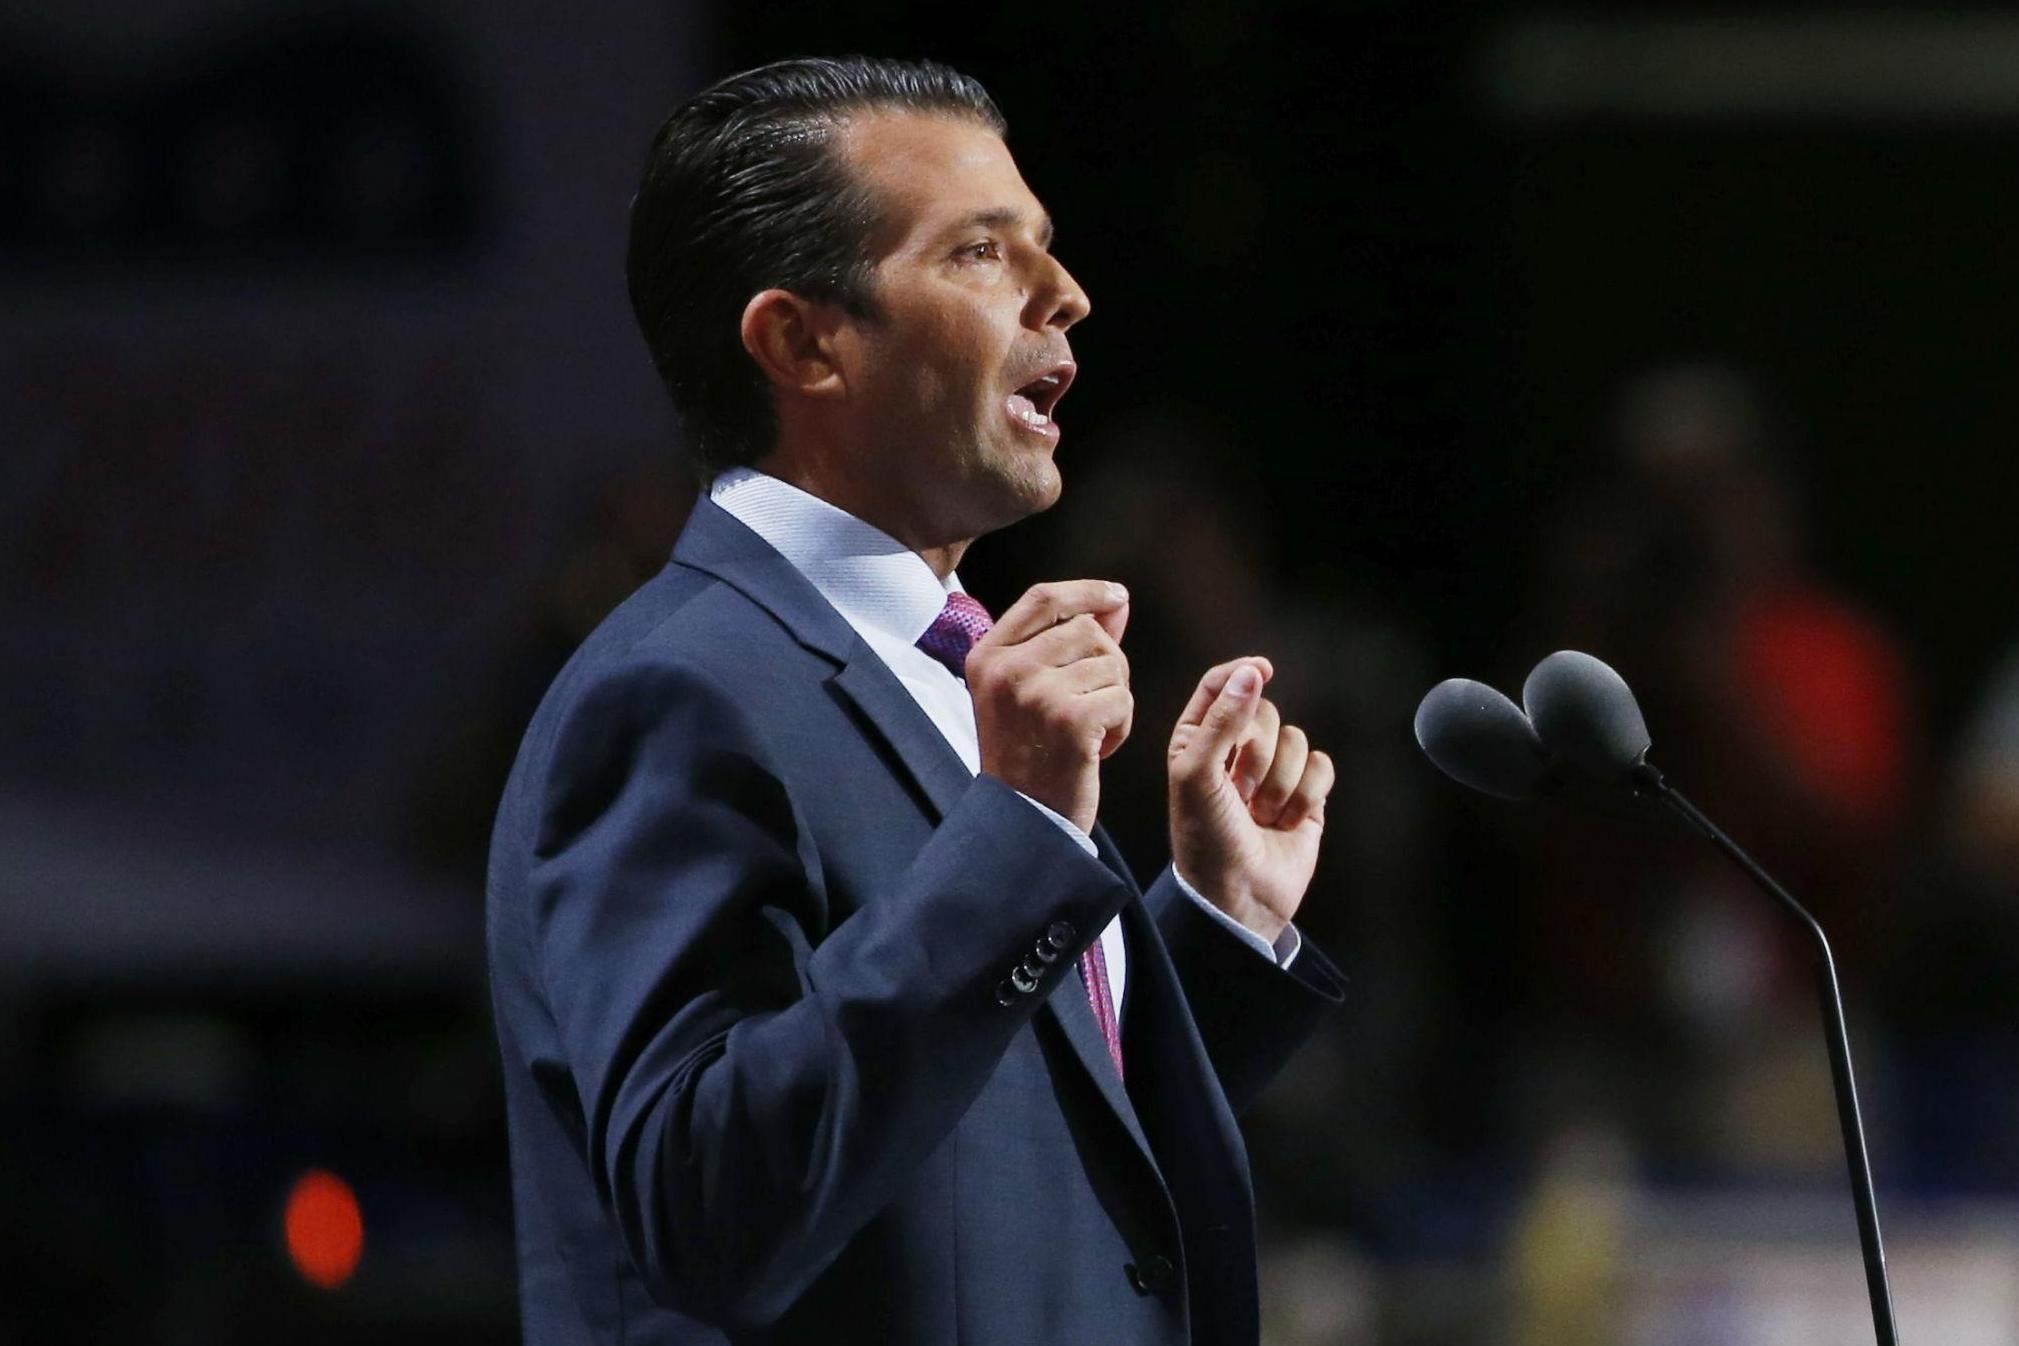 Trump Jr is the first child of Trump and Czech former model Ivana Trump and currently works along with his sister Ivanka Trump and brother Eric Trump in the role of Executive Vice President at The Trump Organisation